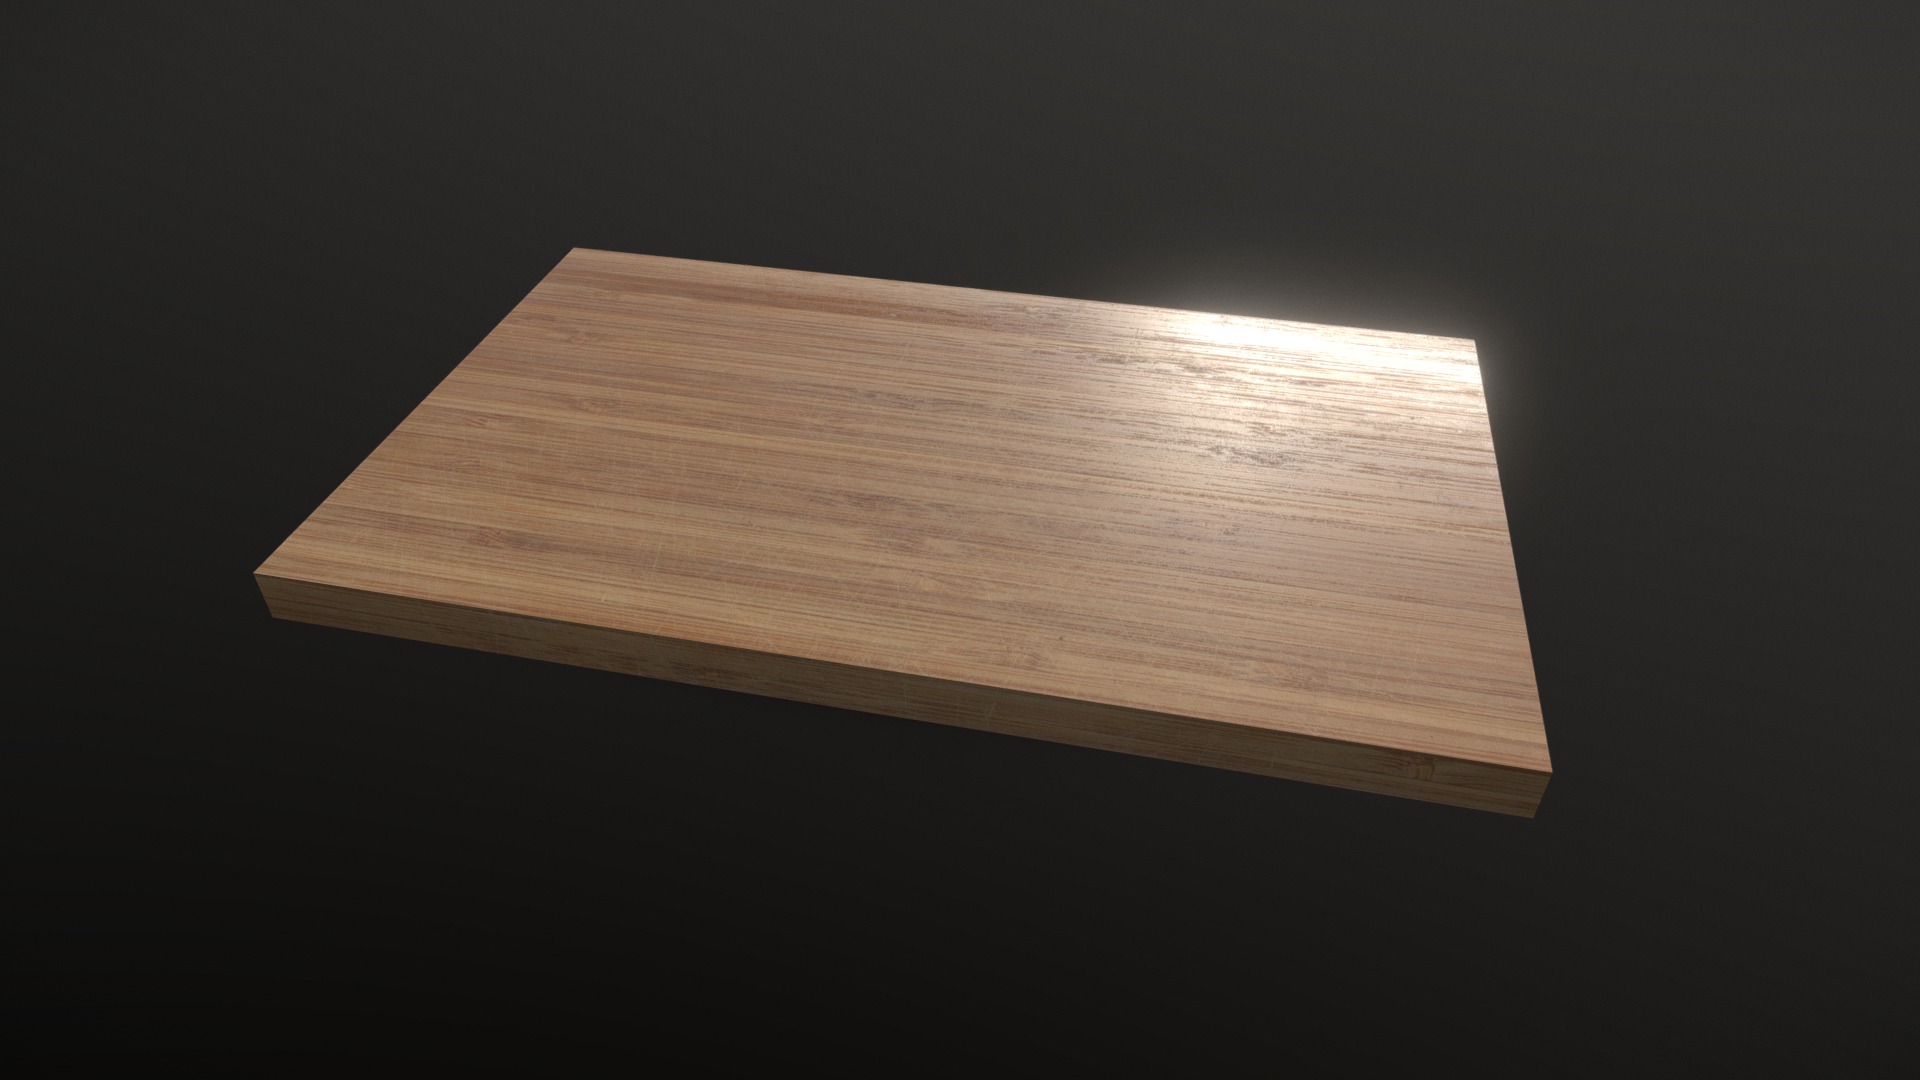 3D model PBR Cutting Board - This is a 3D model of the PBR Cutting Board. The 3D model is about a wooden box with a light on top.